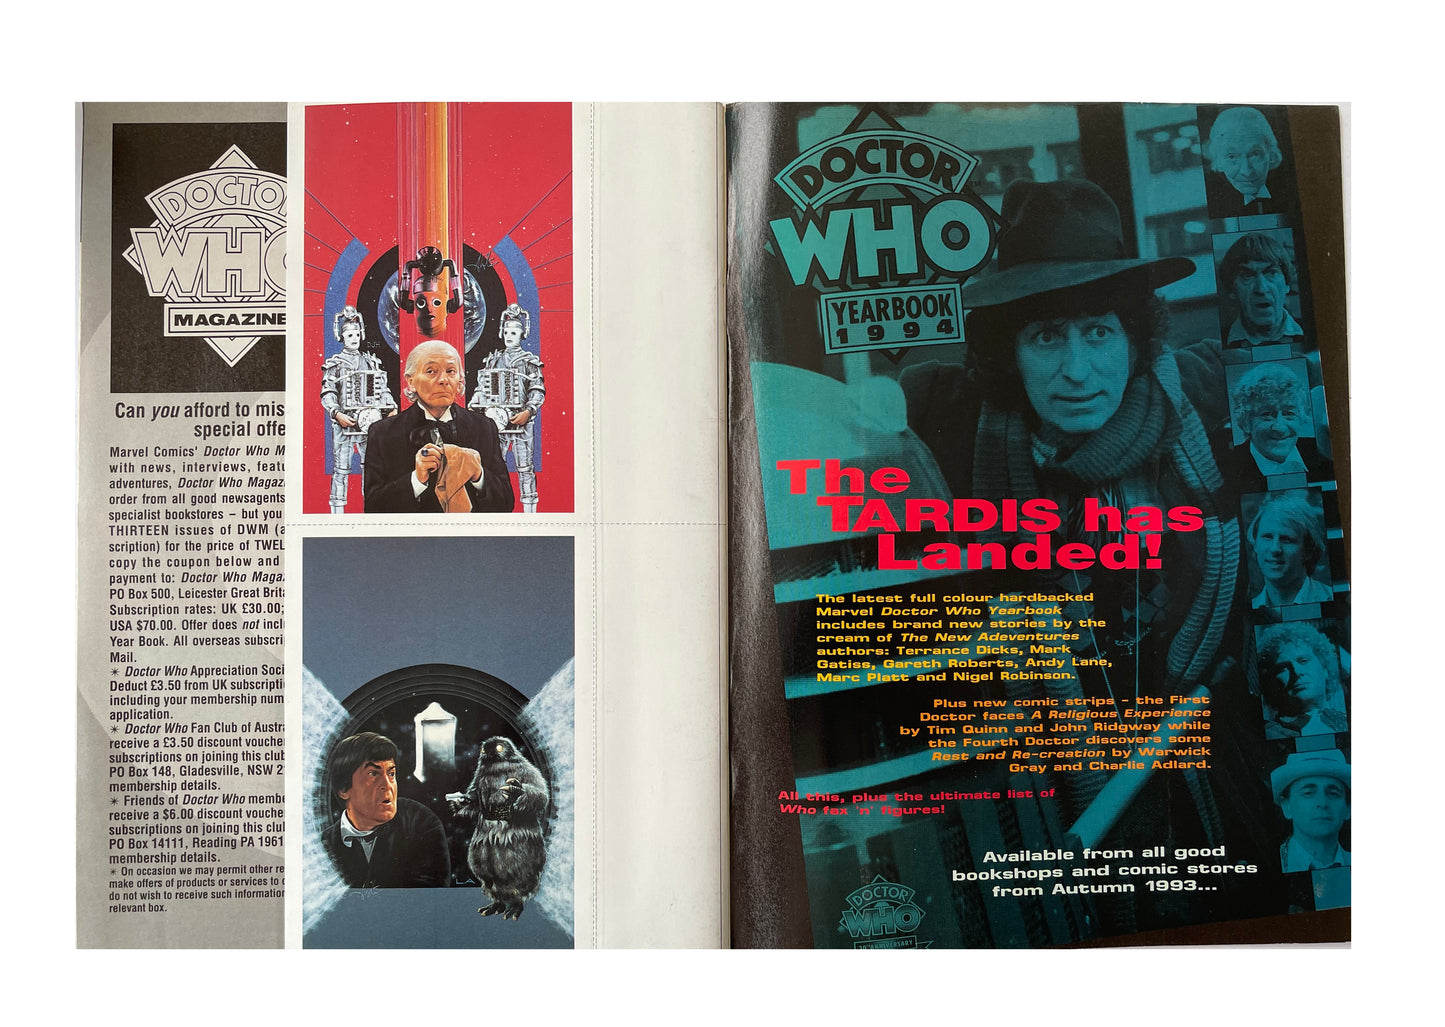 Vintage BBC Doctor Dr Who Magazine Issue Number 203 1st September 1993 - With Free Postcards - Shop Stock Room Find